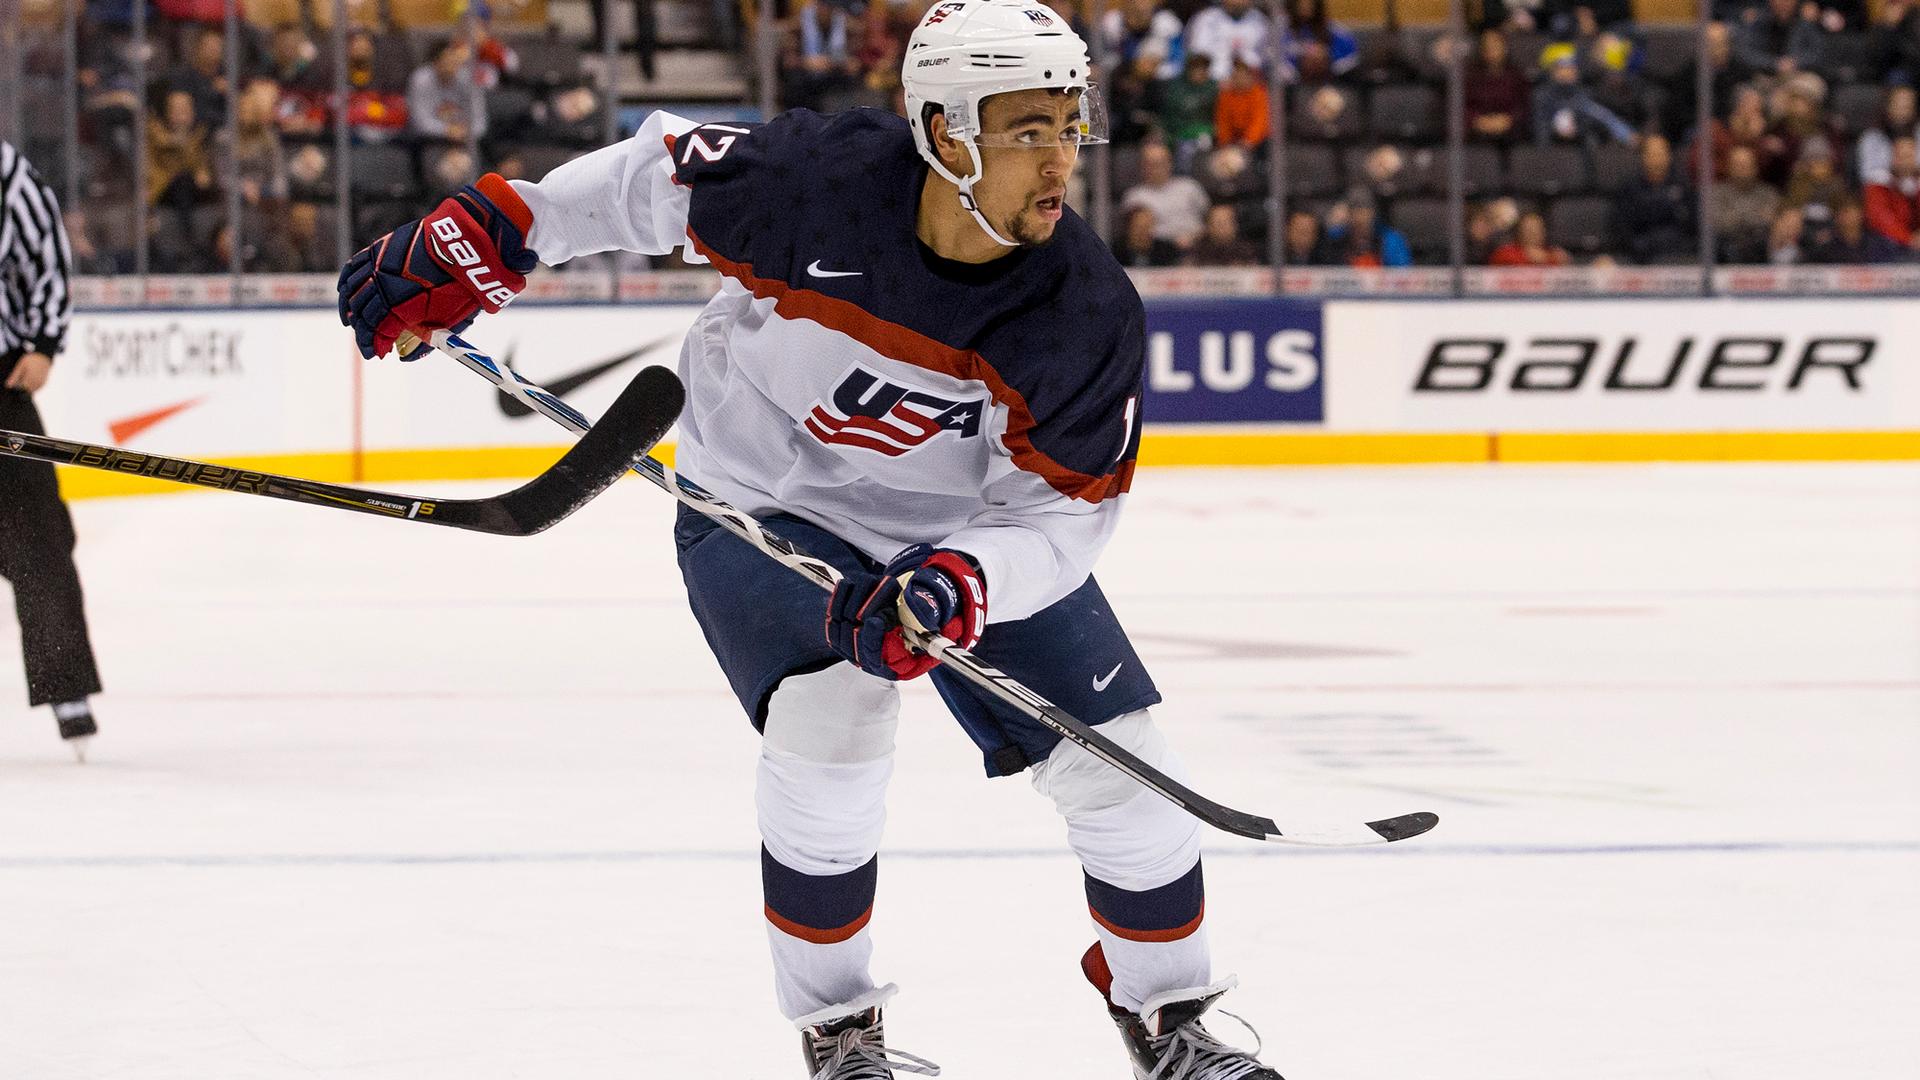 Jordan Greenway will become the first black ice hockey player to skate for Team USA at the Olympics, pictured here at the IIHF World Junior Championship on Dec. 28, 2016.